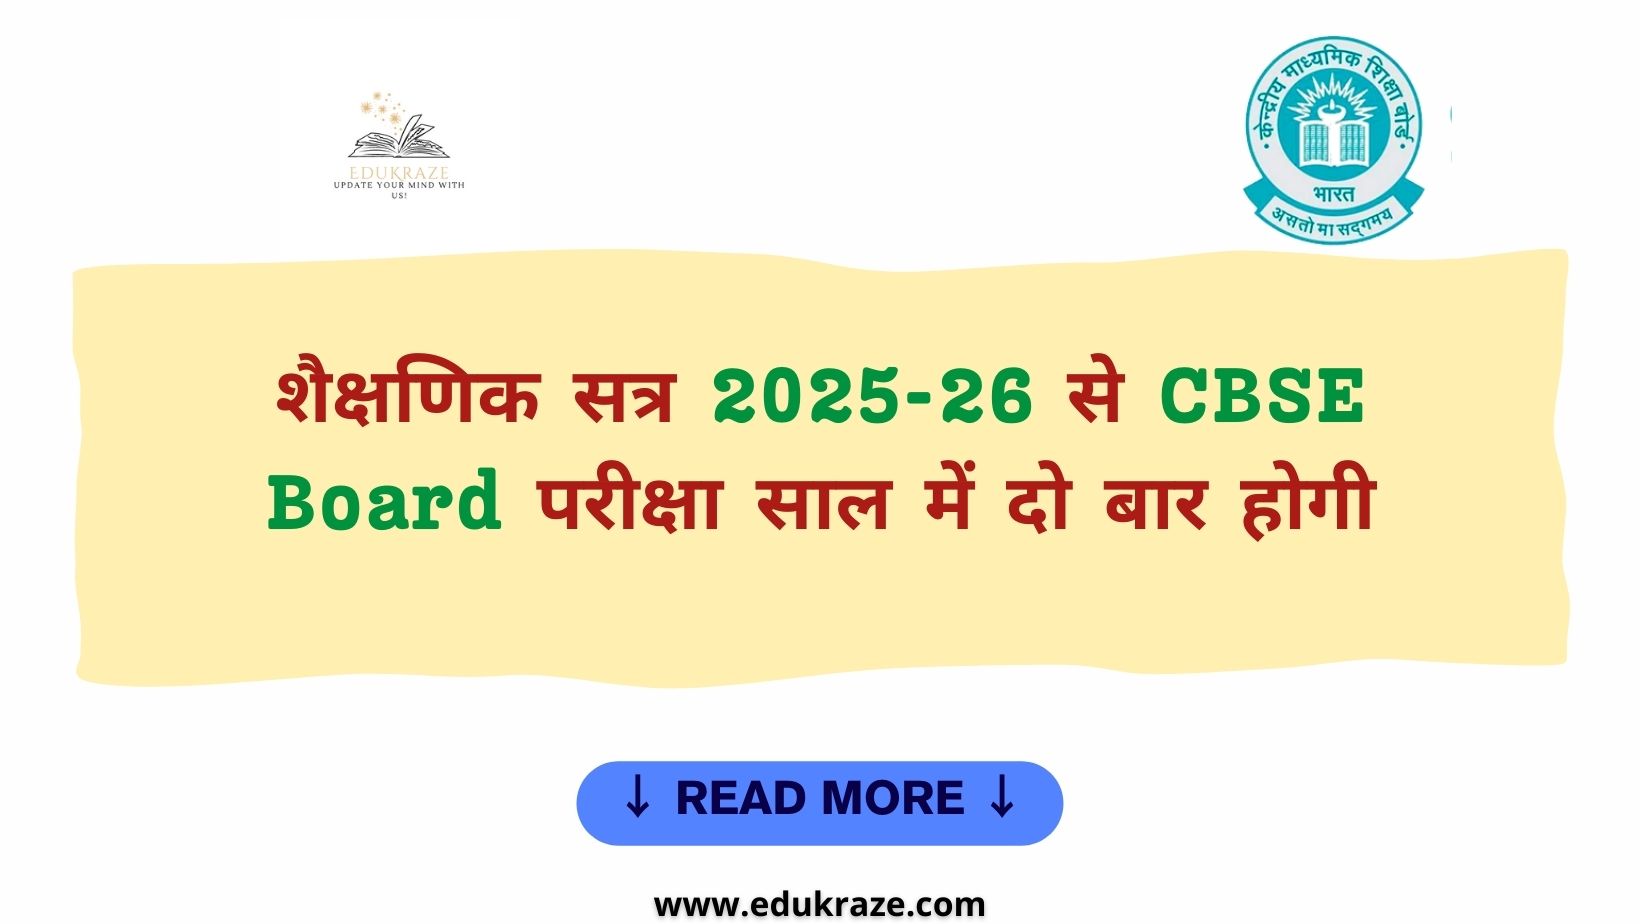 CBSE Board Exams to be Held Twice a Year, Starting 2025-26: Announced by Dharmendra Pradhan